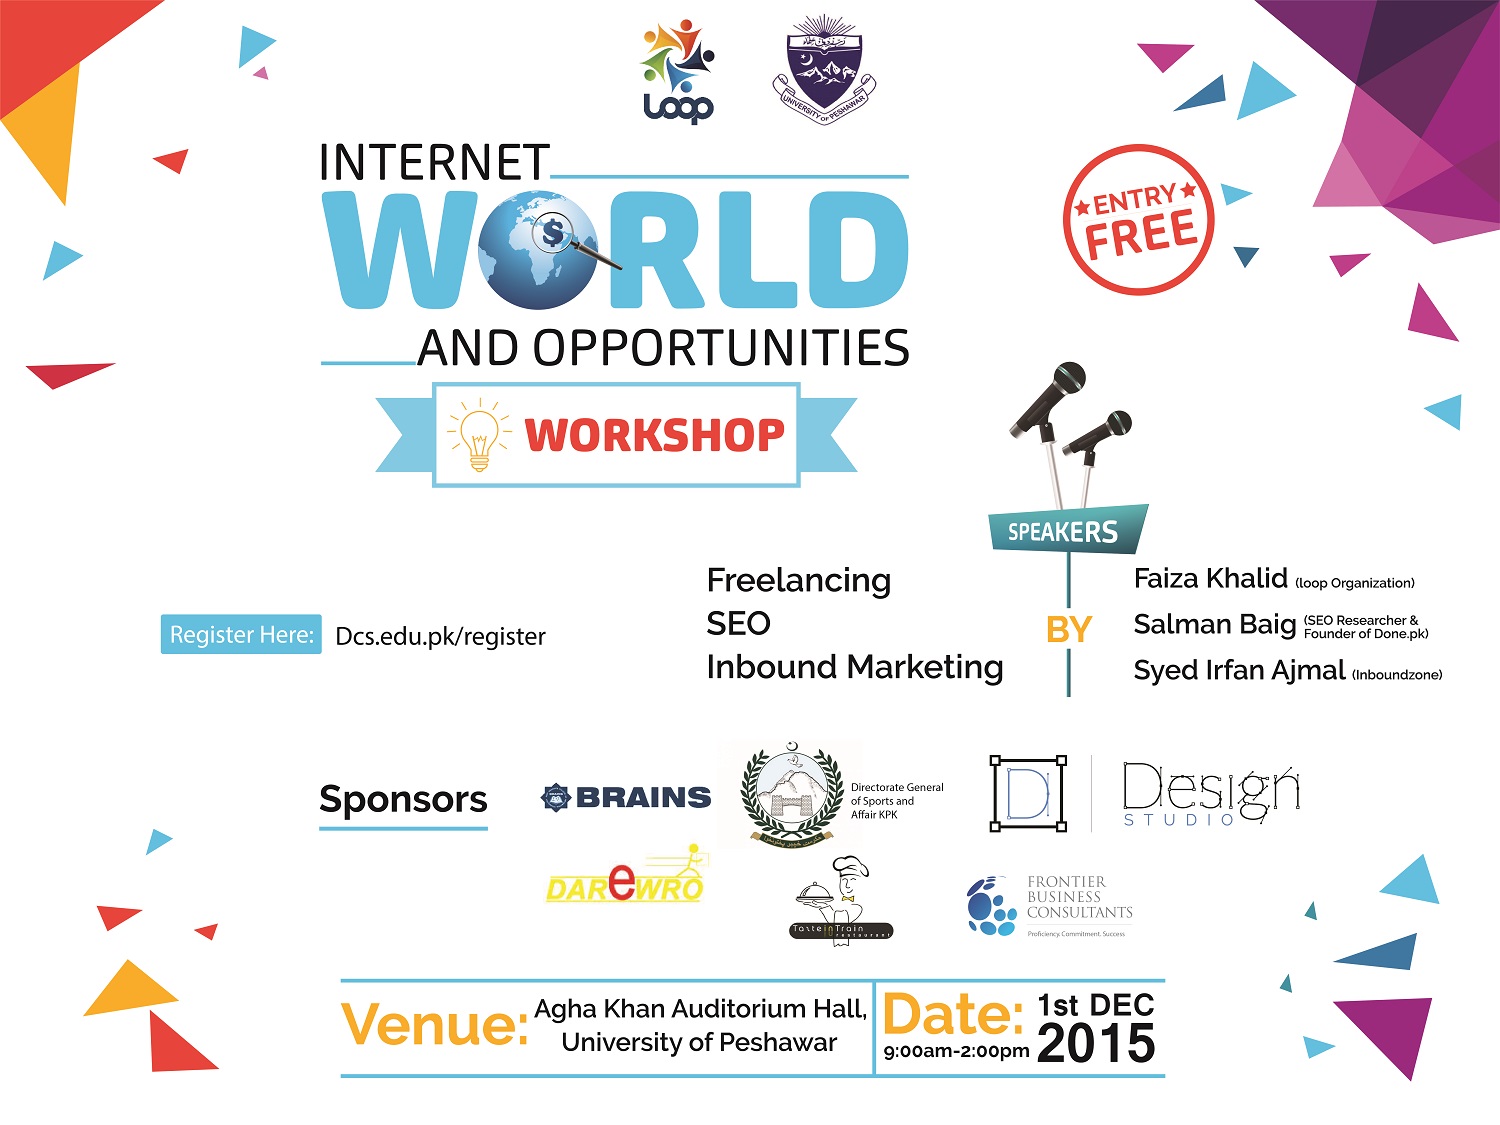 Workshop on Internet World and Opportunities